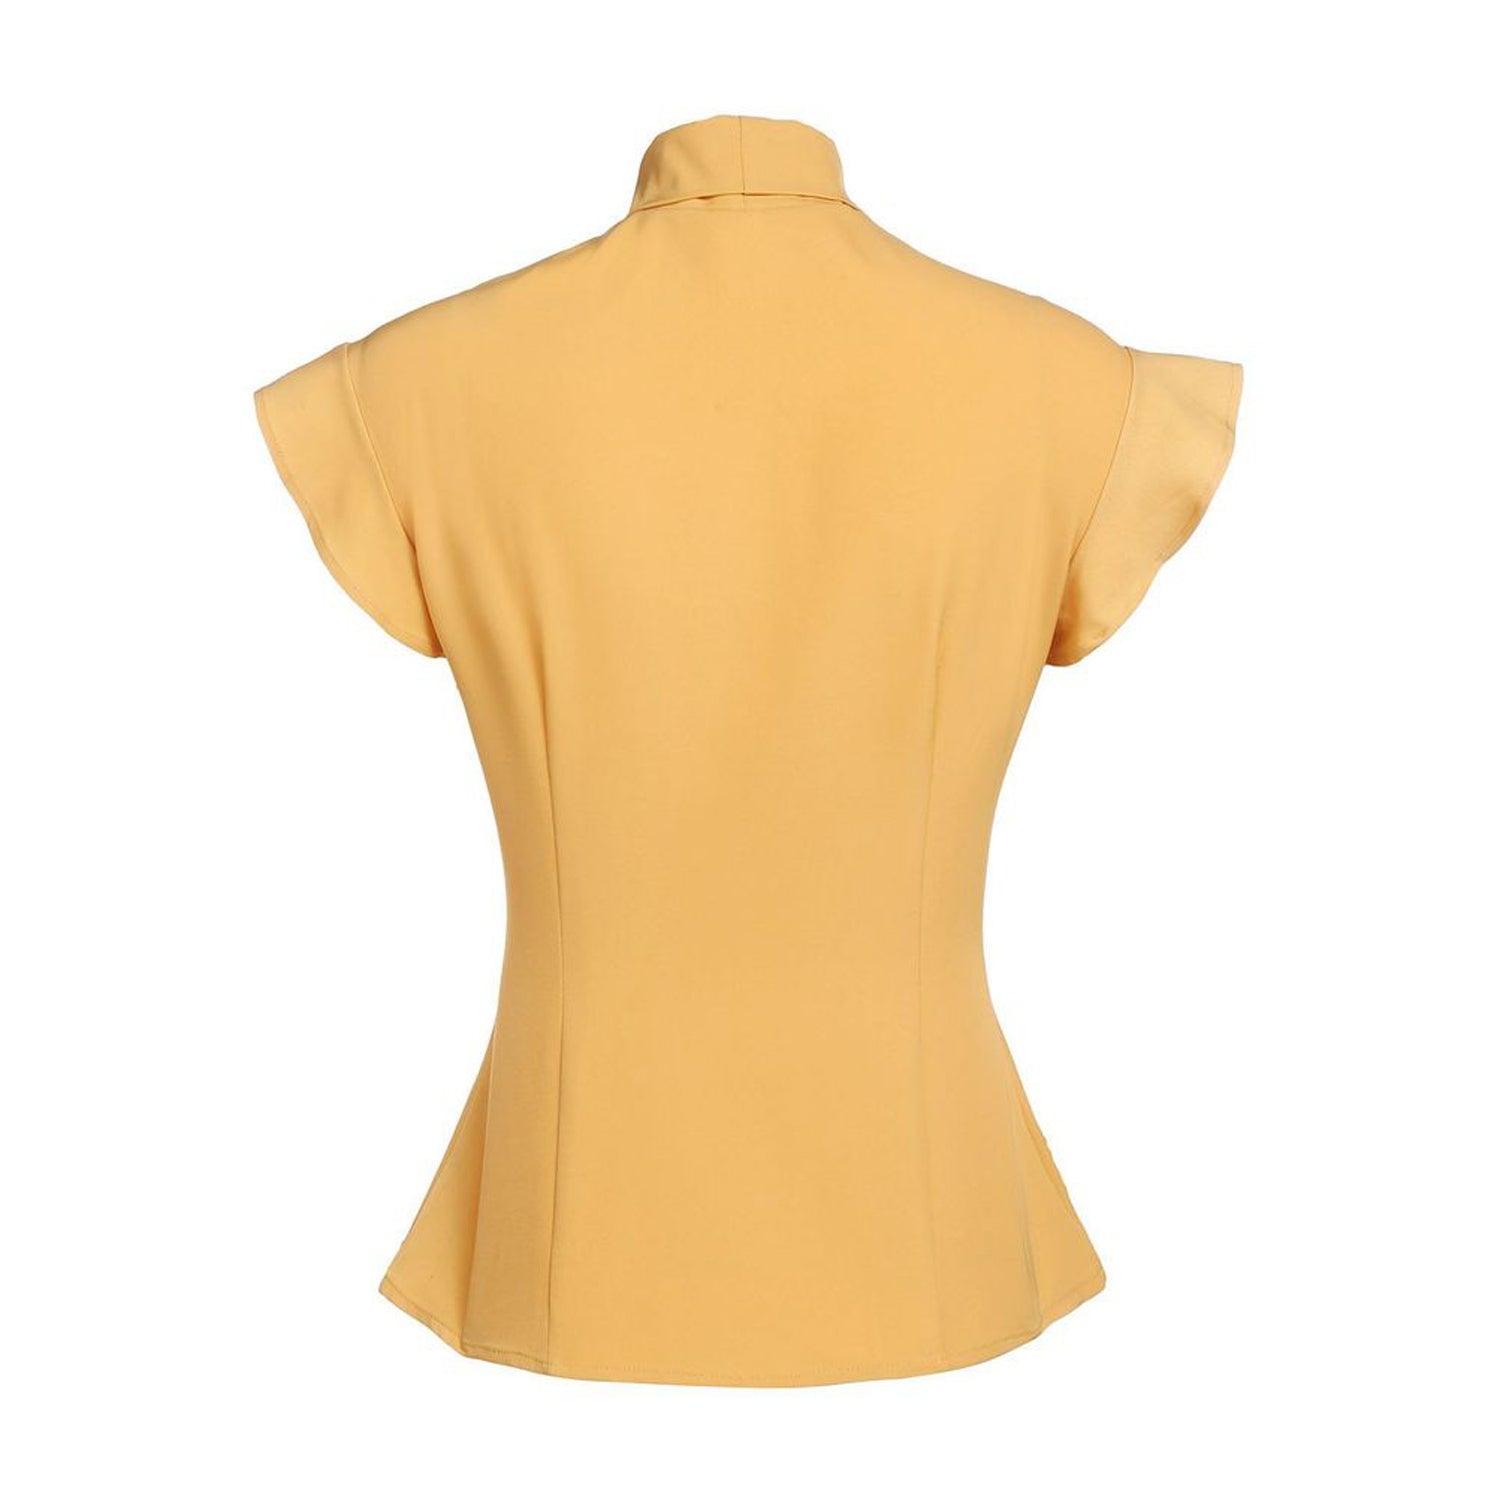 Women's Vintage Short cap Sleeve Slim Fit 1950s Tops Blouse with bowknot(S-2XL) Sai Feel